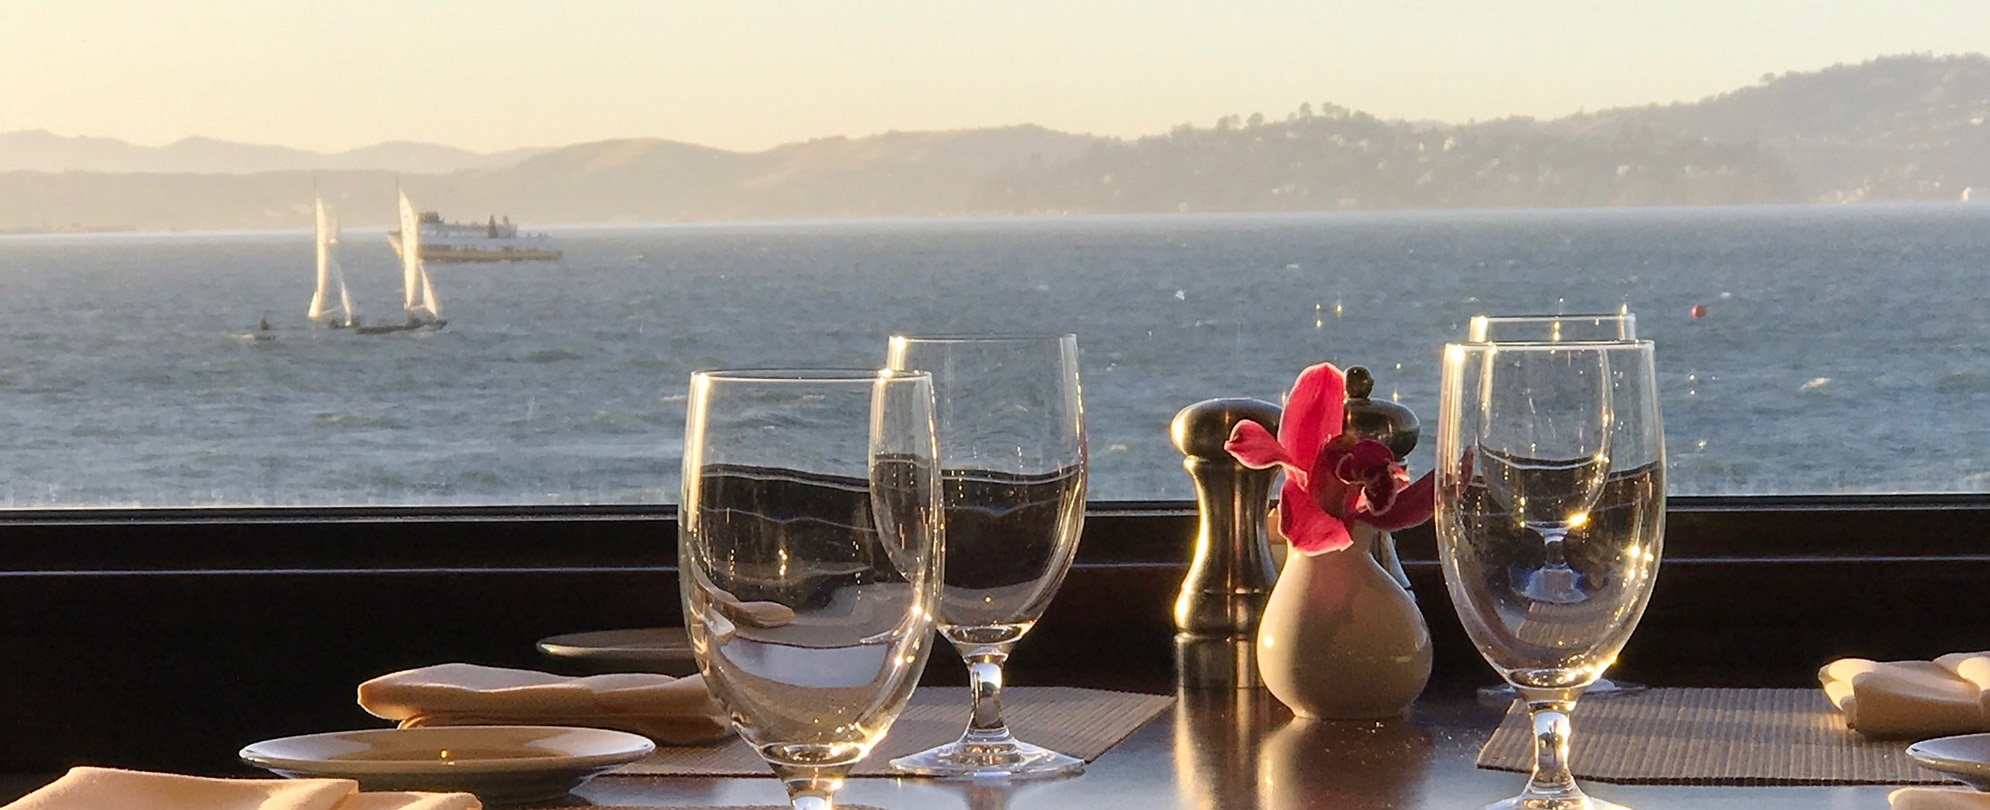 View from inside a waterfront restaurant of set table with four glasses overlooking the San Francisco Bay..